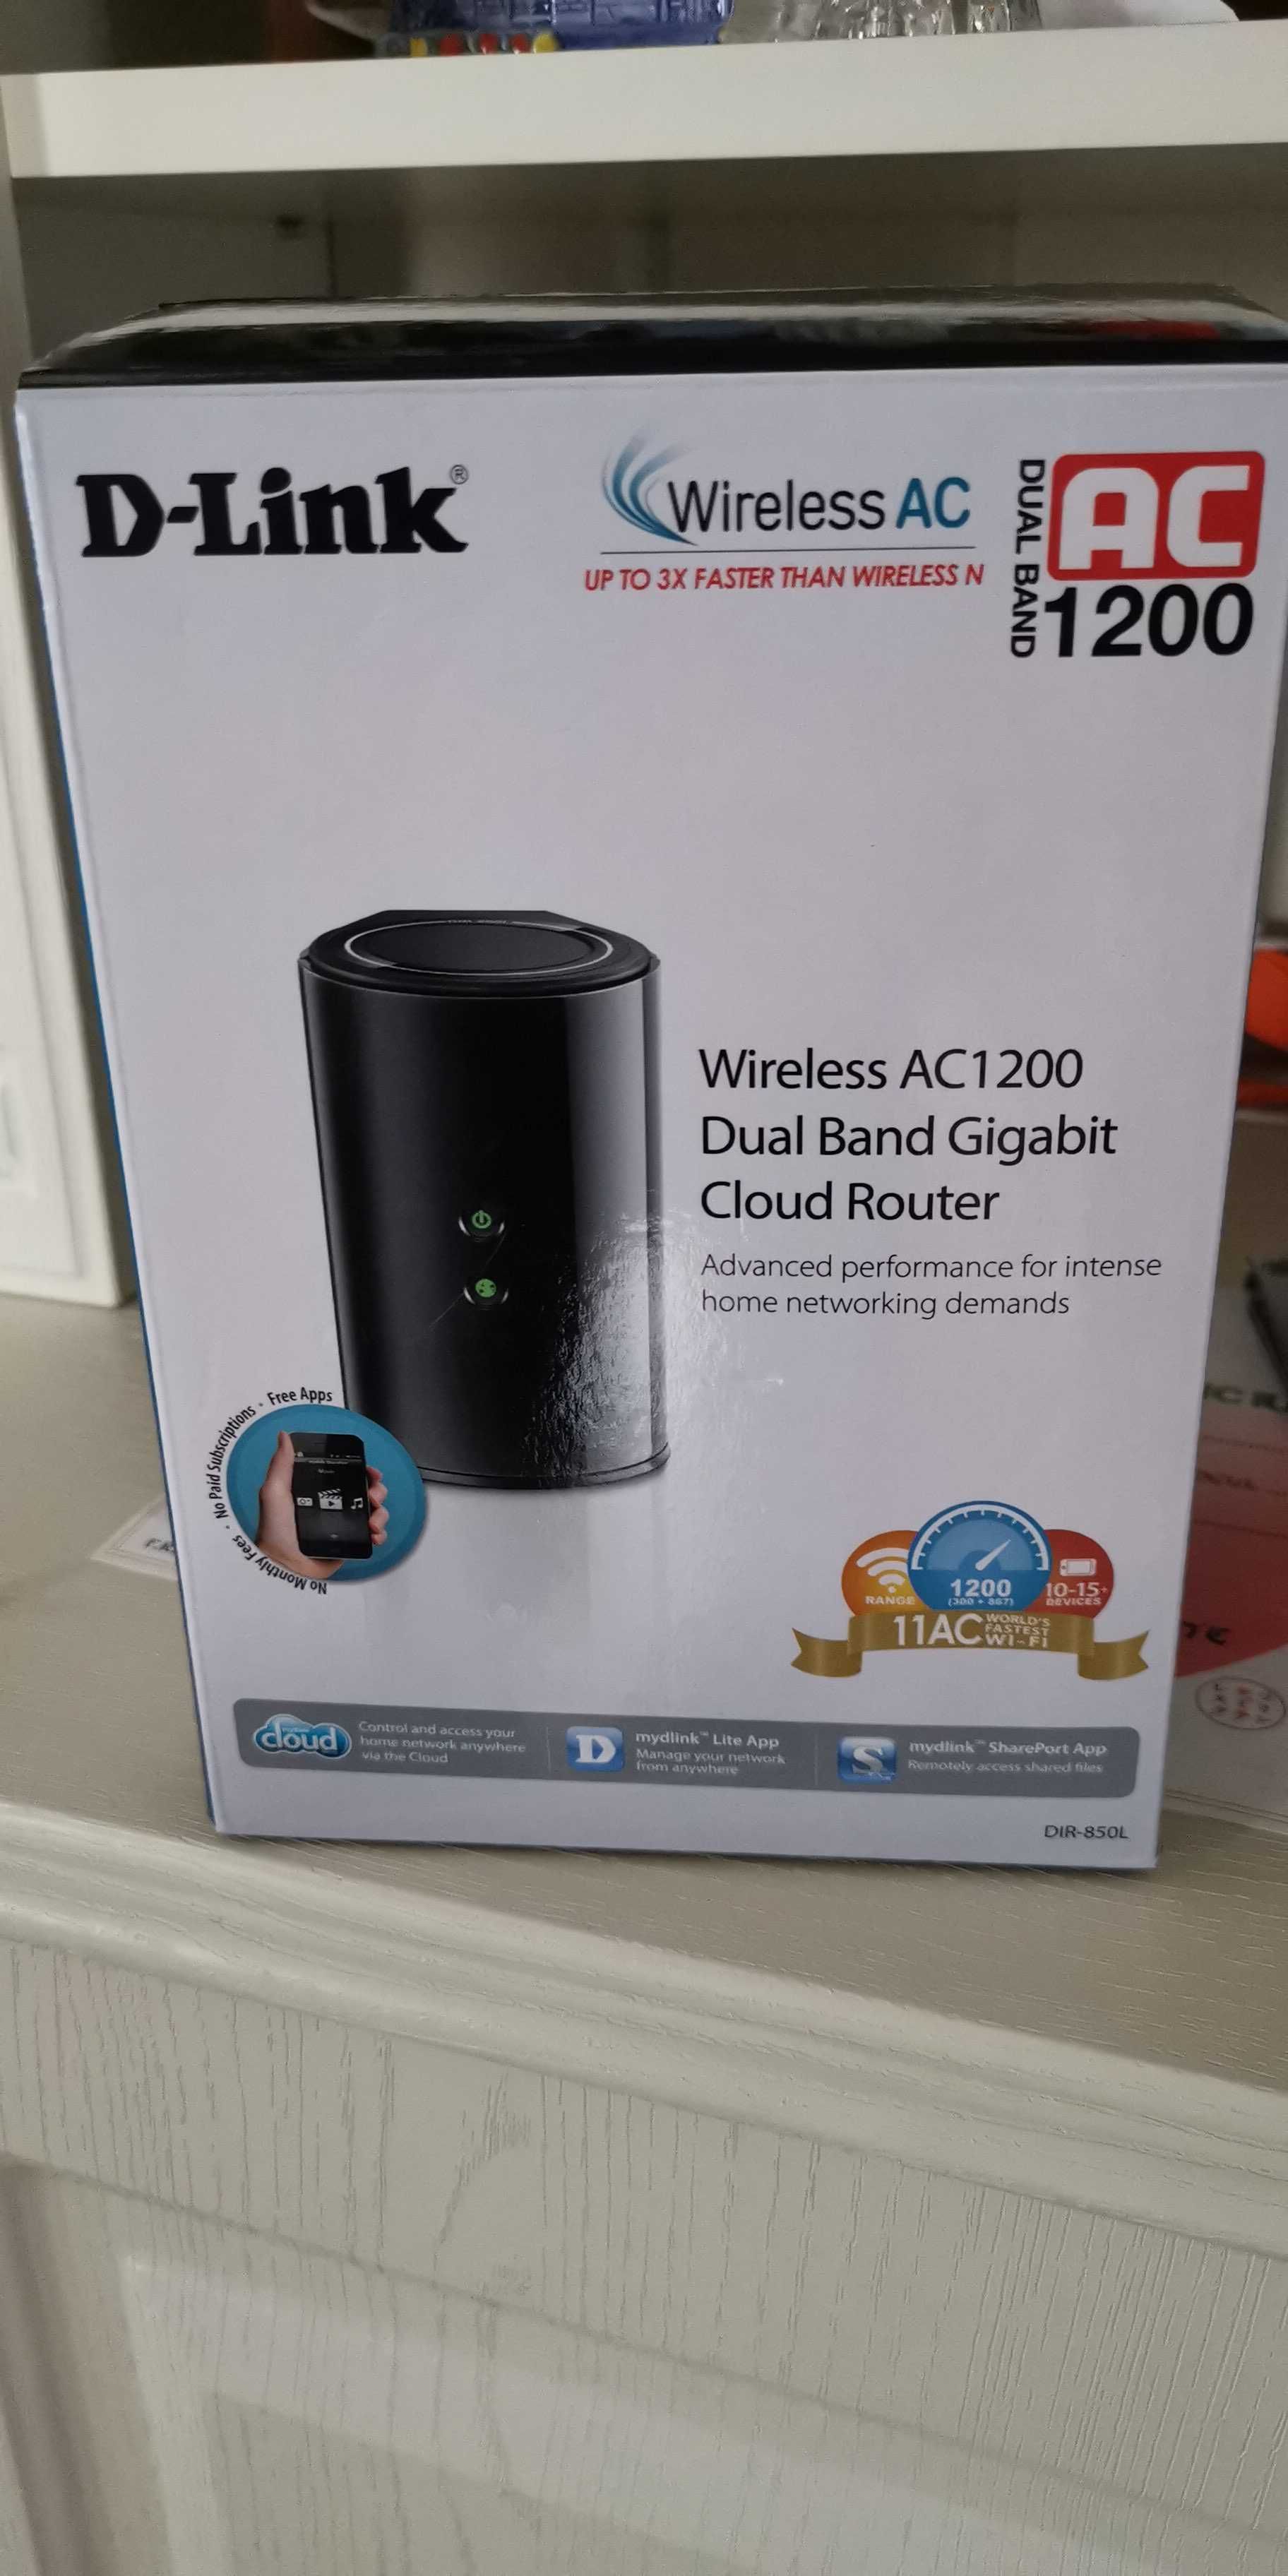 Router wireless